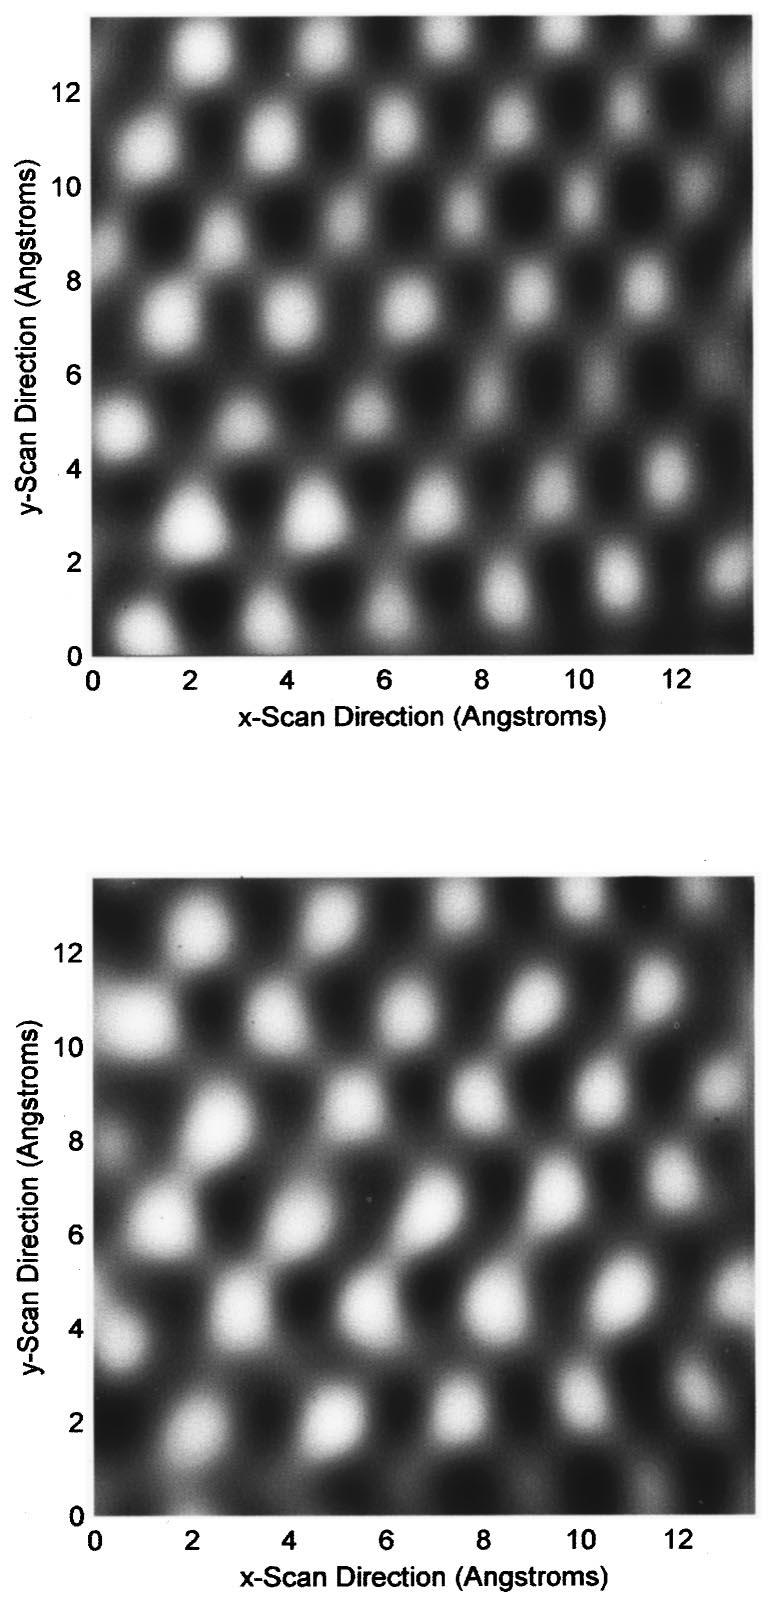 Simulated STM images of a single row of atoms for a highly oriented pyrolytic graphite HOPG surface also are depicted in this same figure.